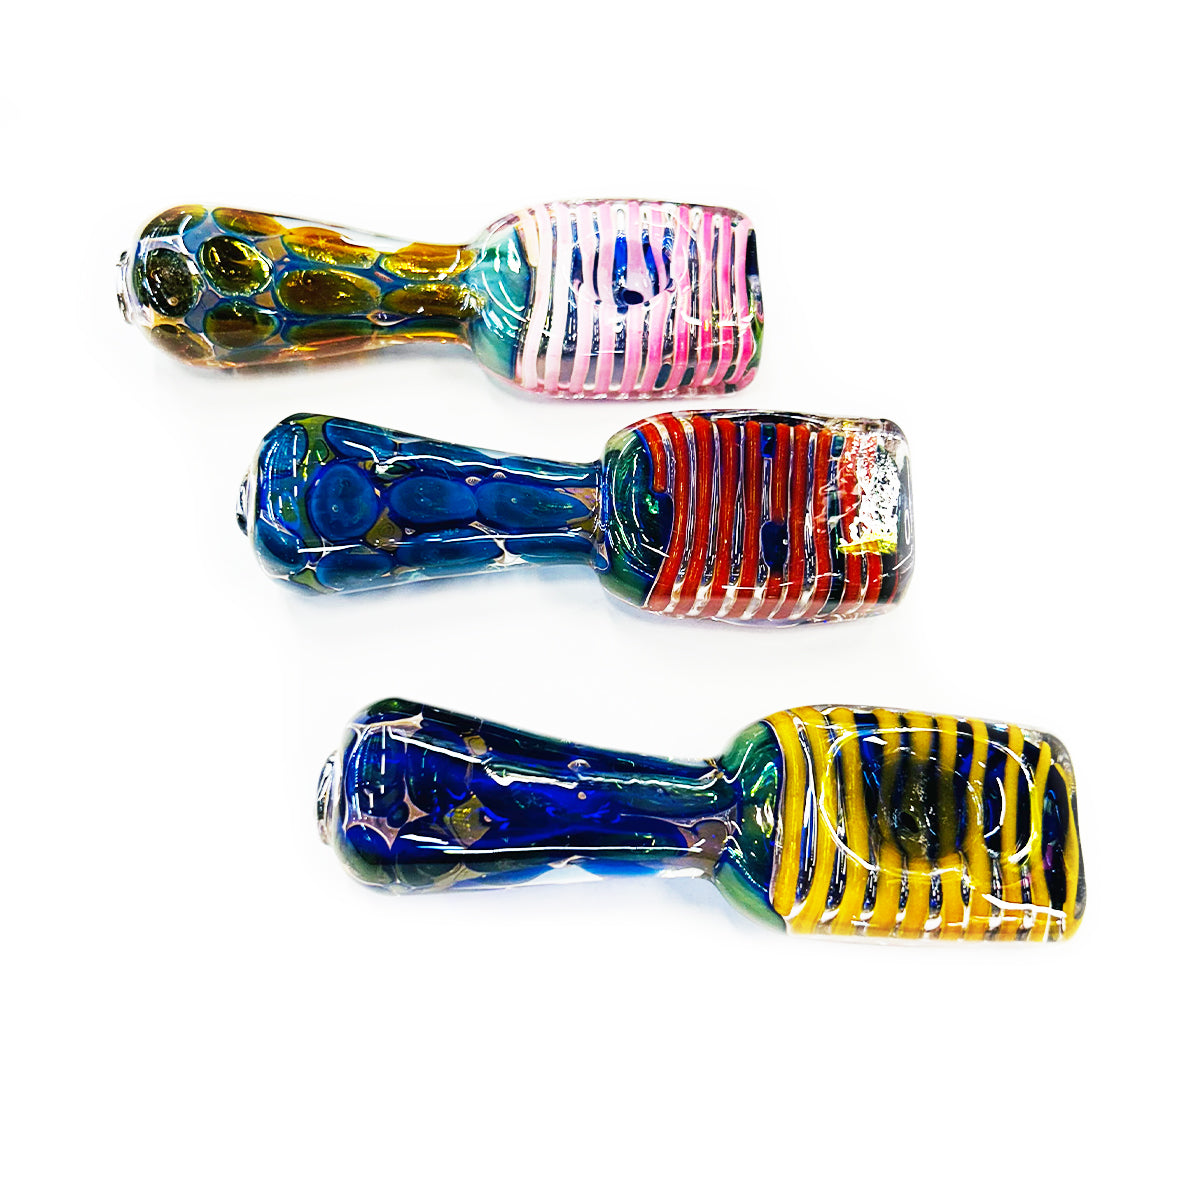 4.5" Gold Fume Glass Hand Pipe Spoon with Pressed Head Swirling Art